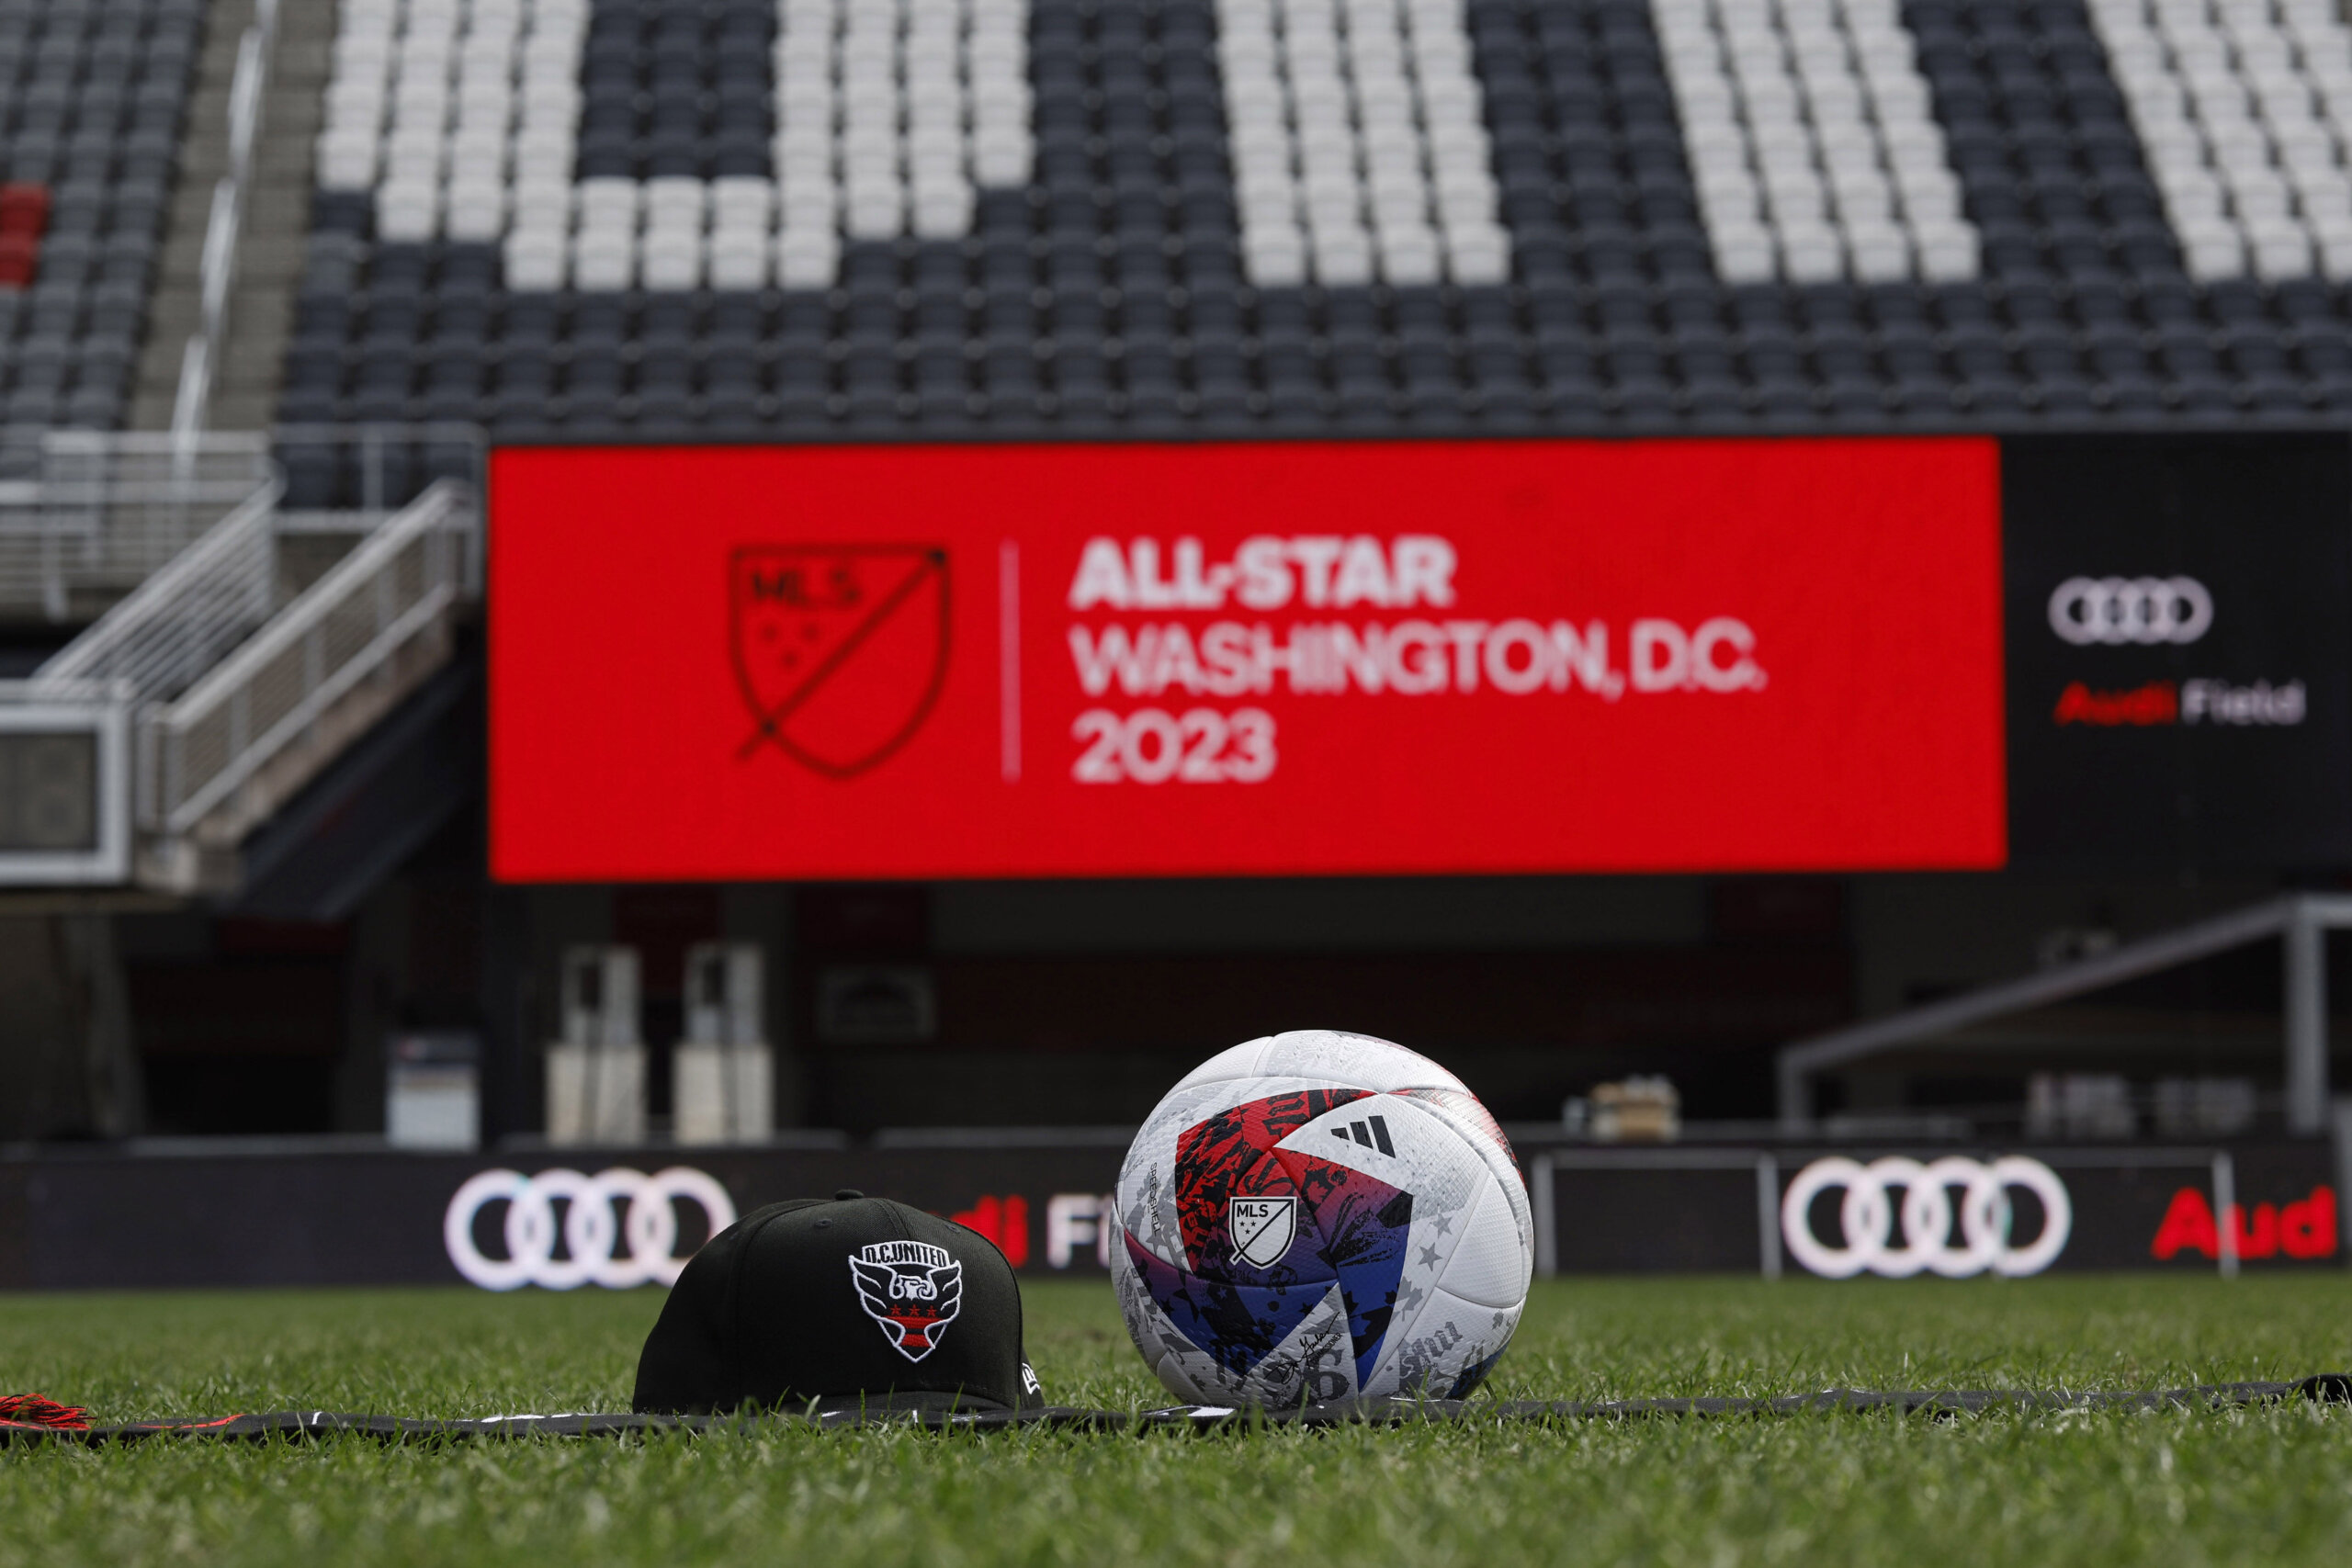 MLS All-Stars vs Liga MX All-Stars: how to watch online and on TV